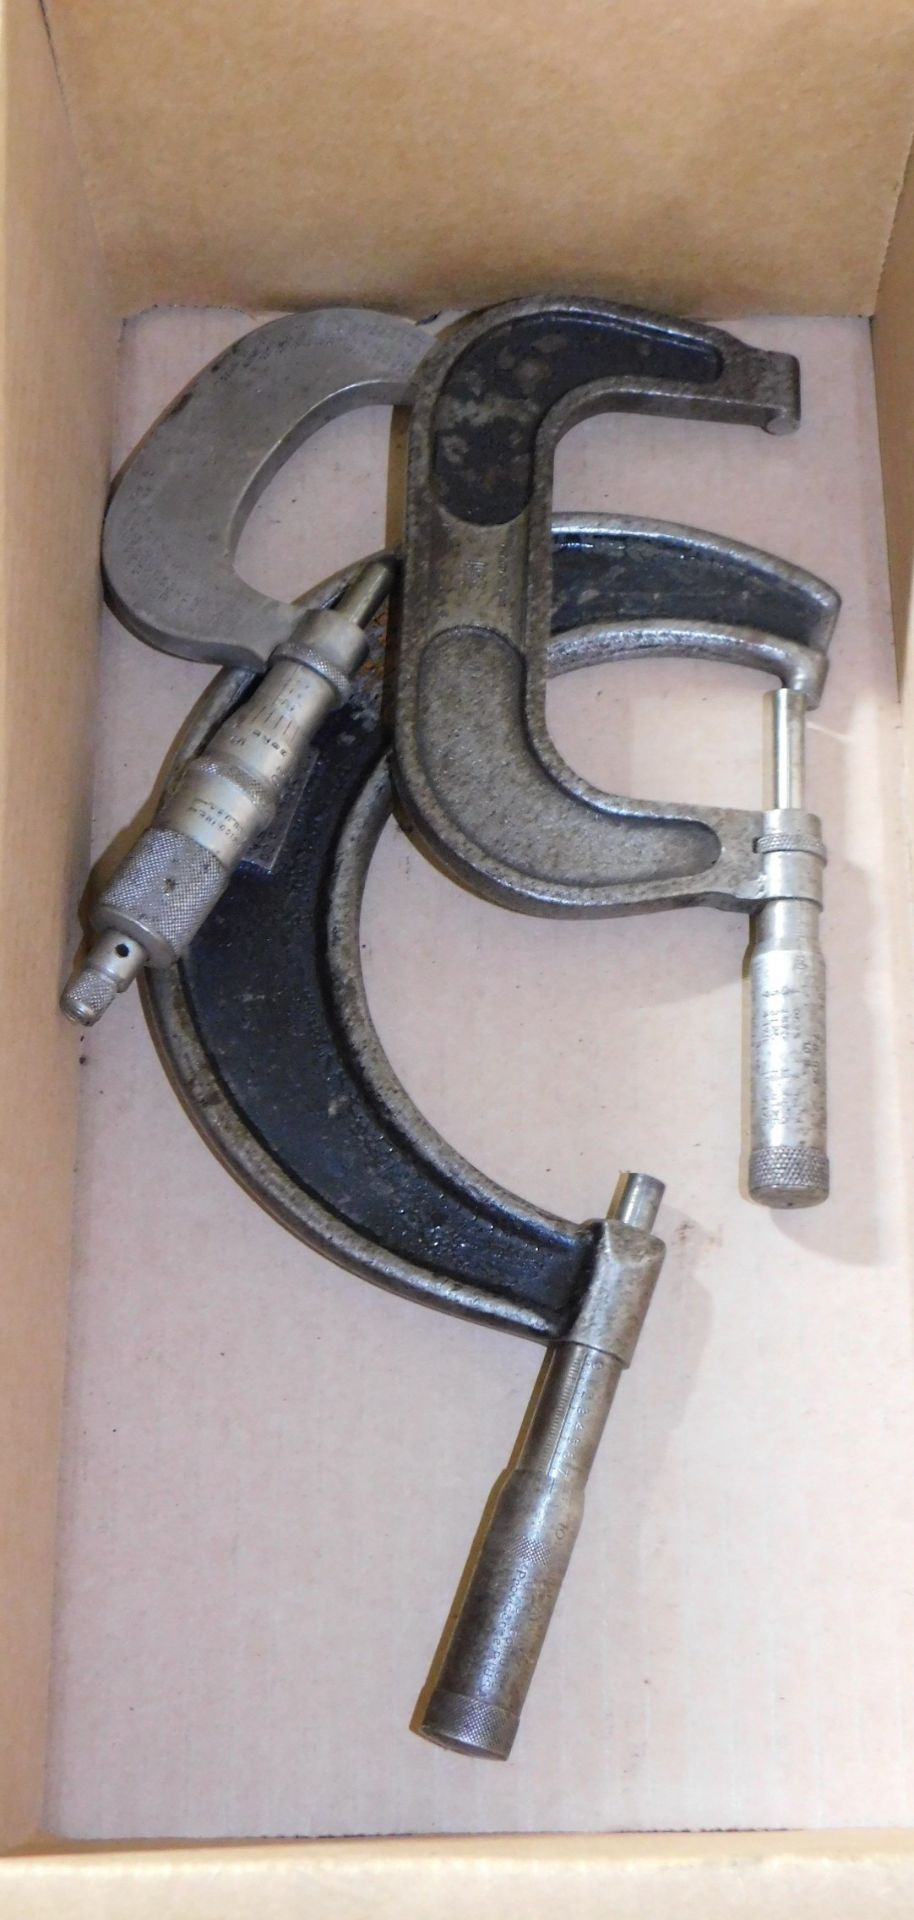 (3) Miscellaneous Micrometers